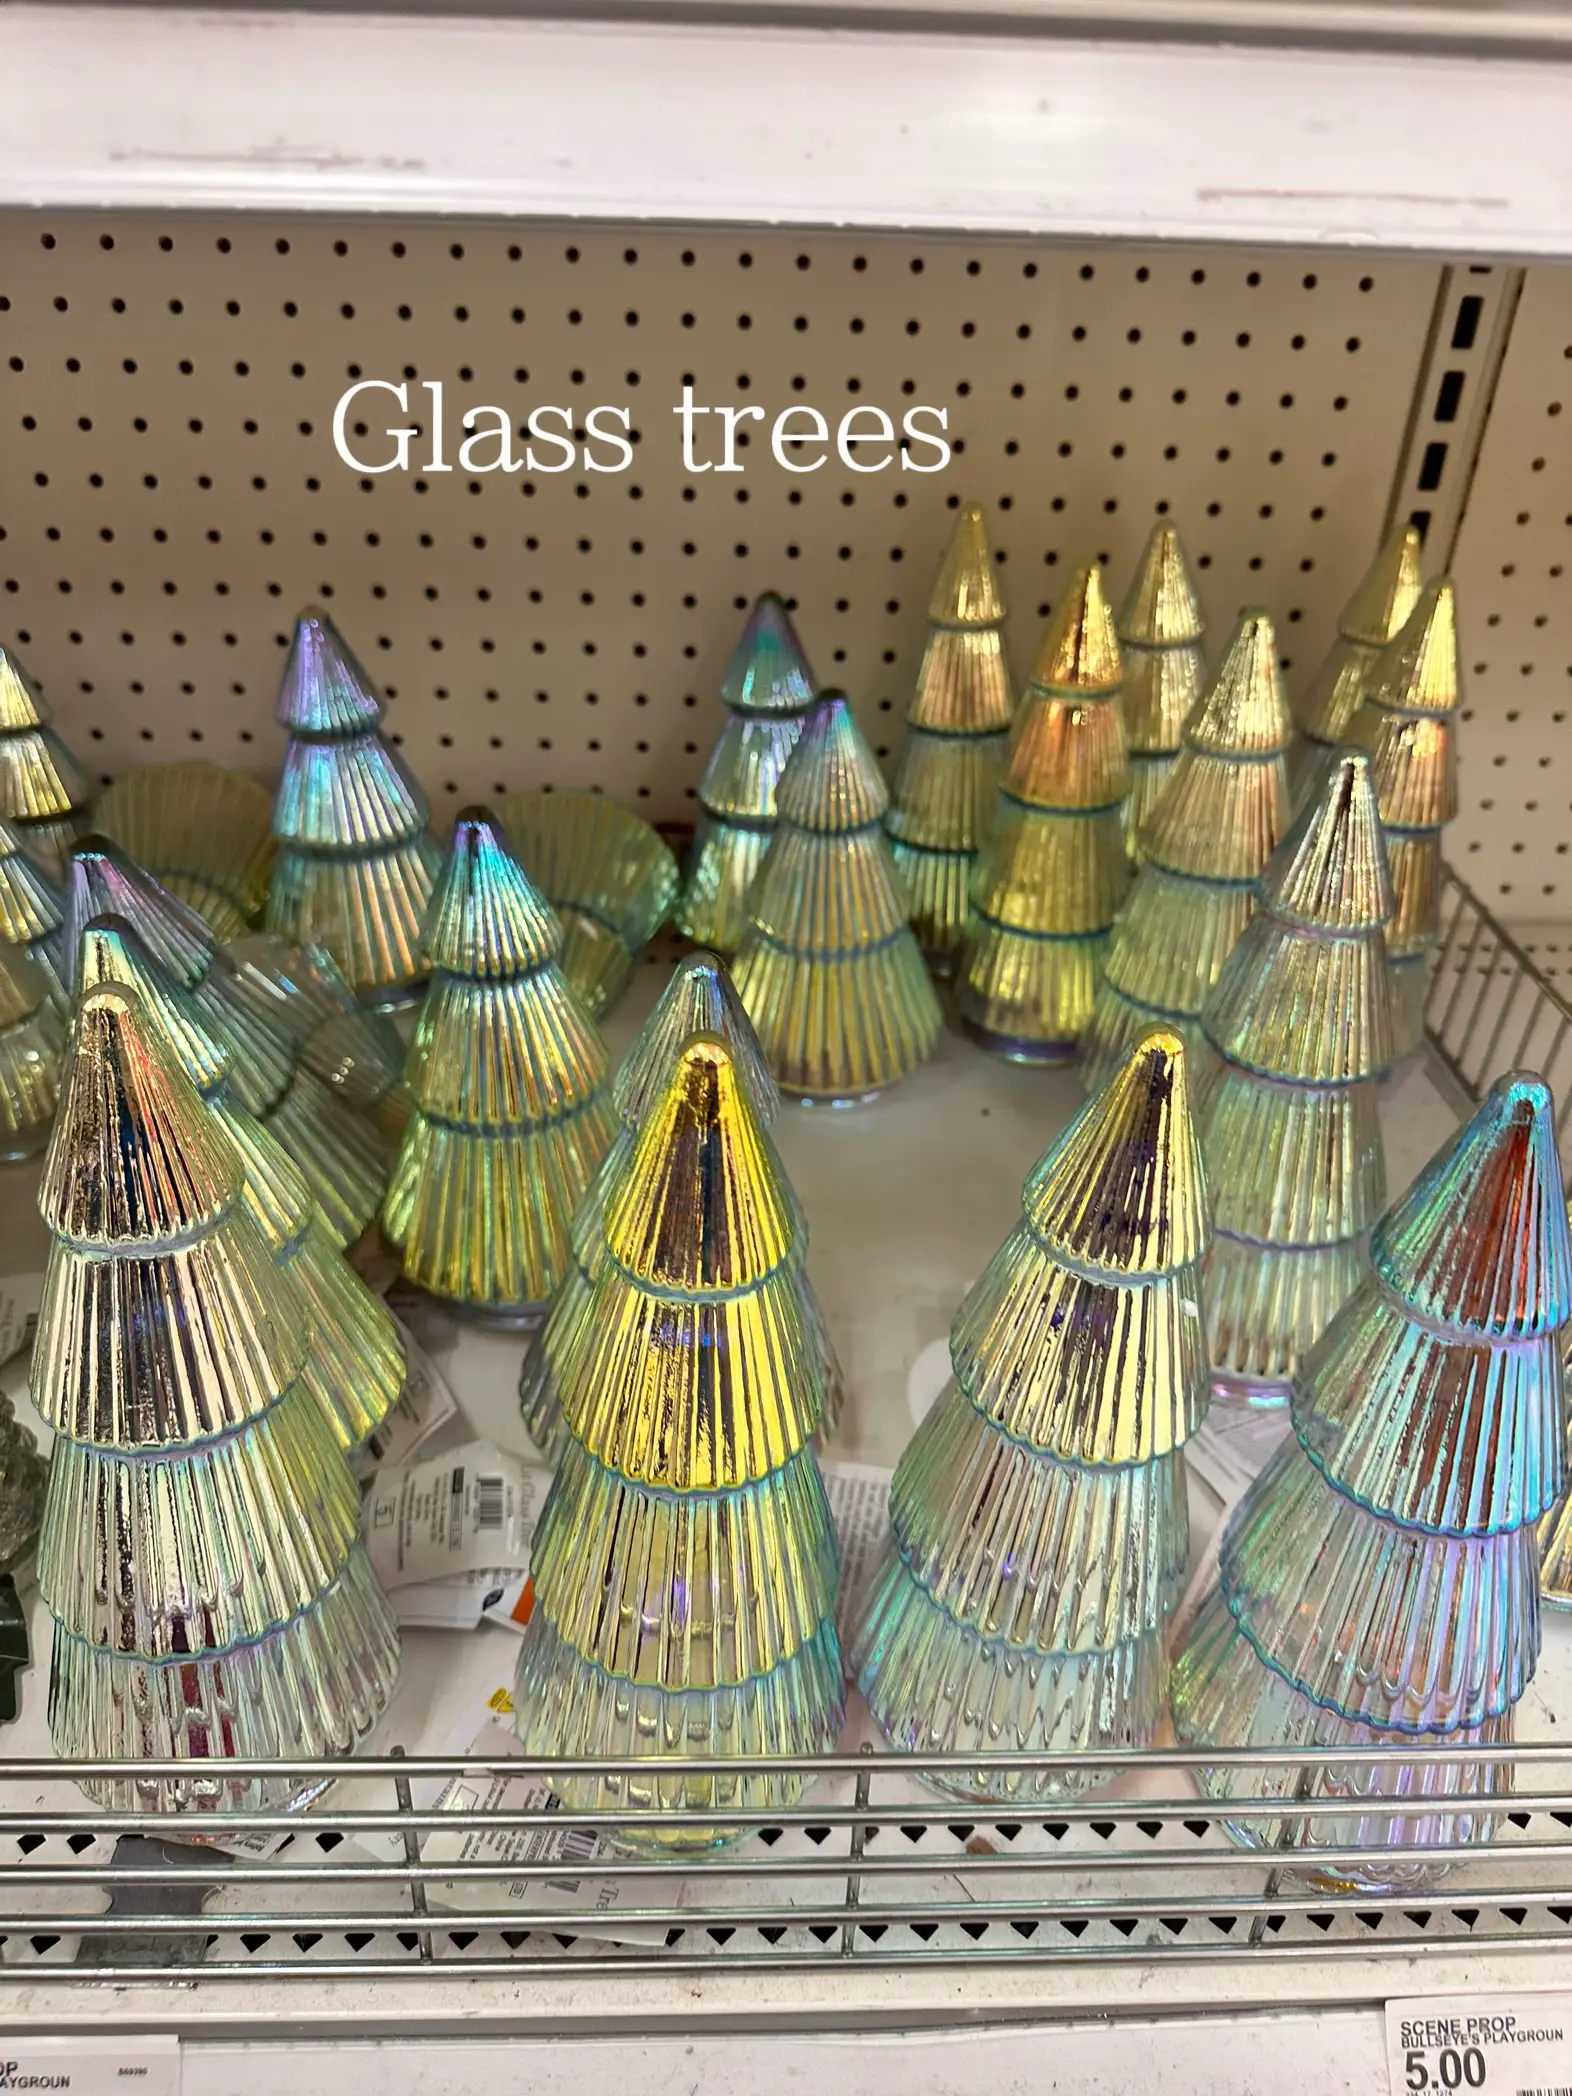  A shelf with a bunch of glass trees on it.